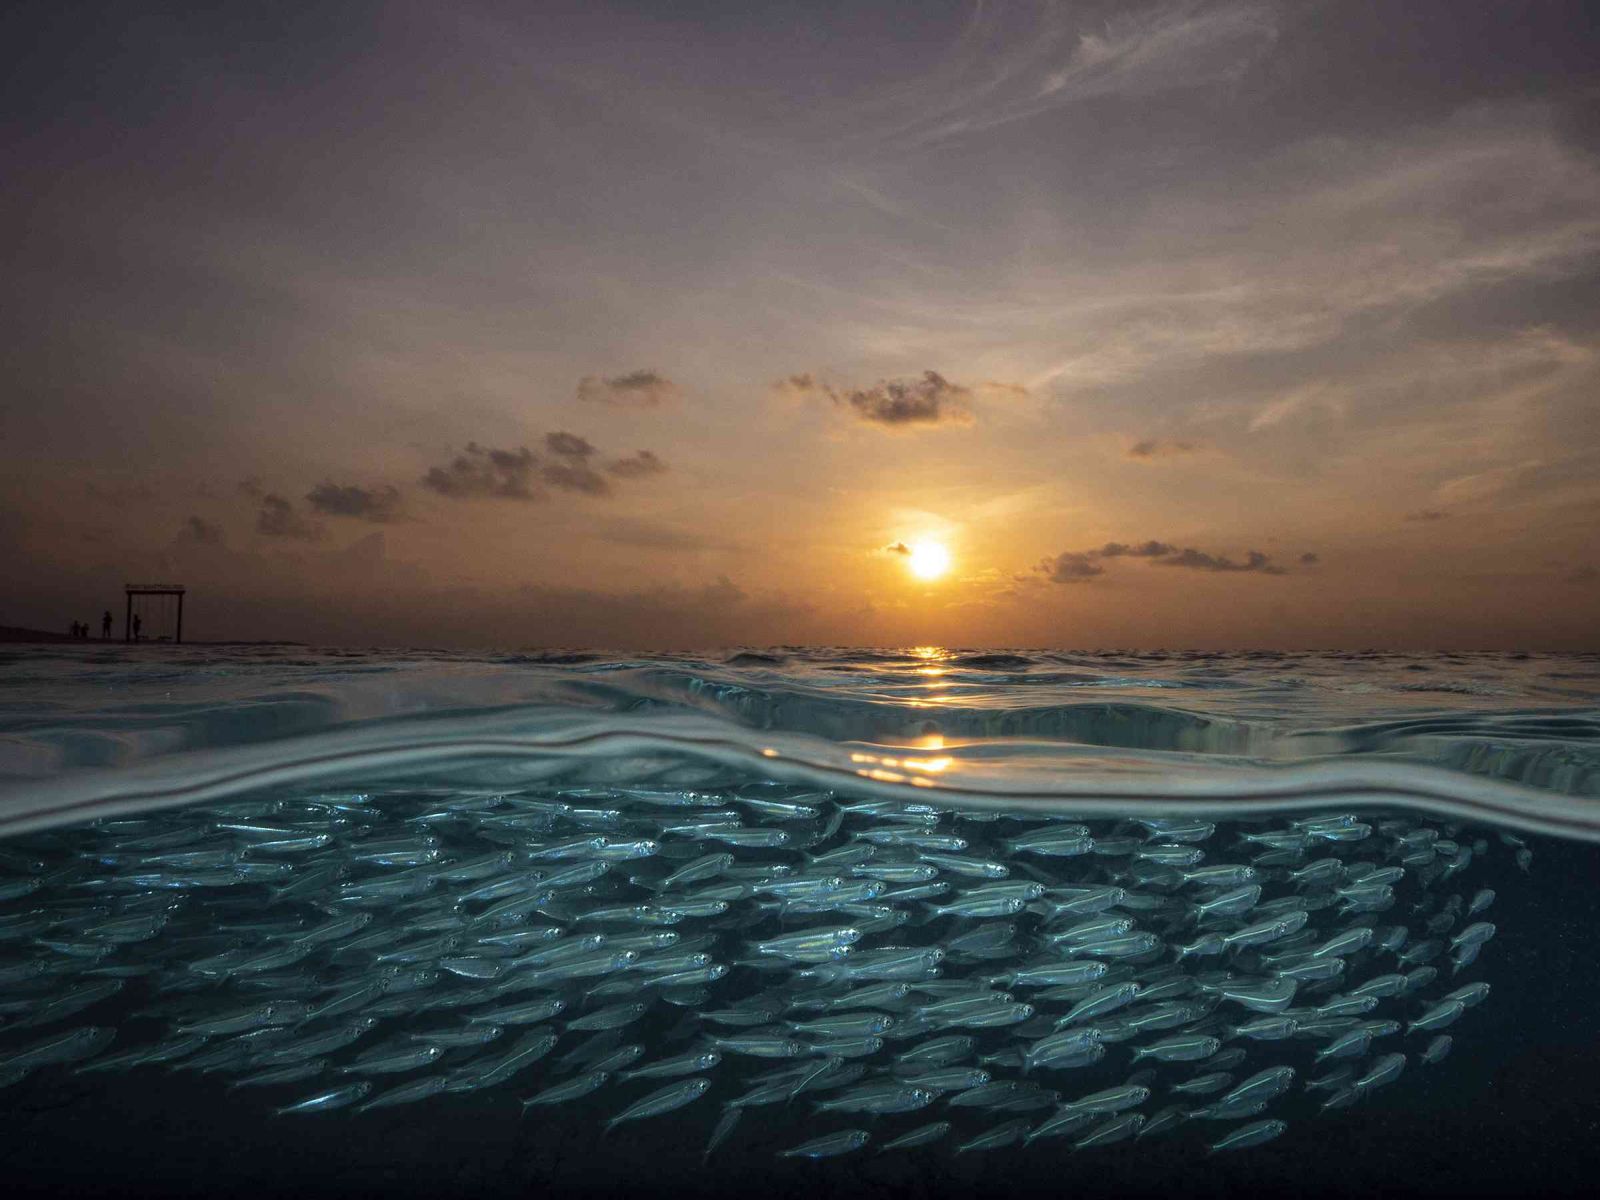 award winning a school of silverside fish swim just below the surface of the water off maalhos island photography by umeed mistry